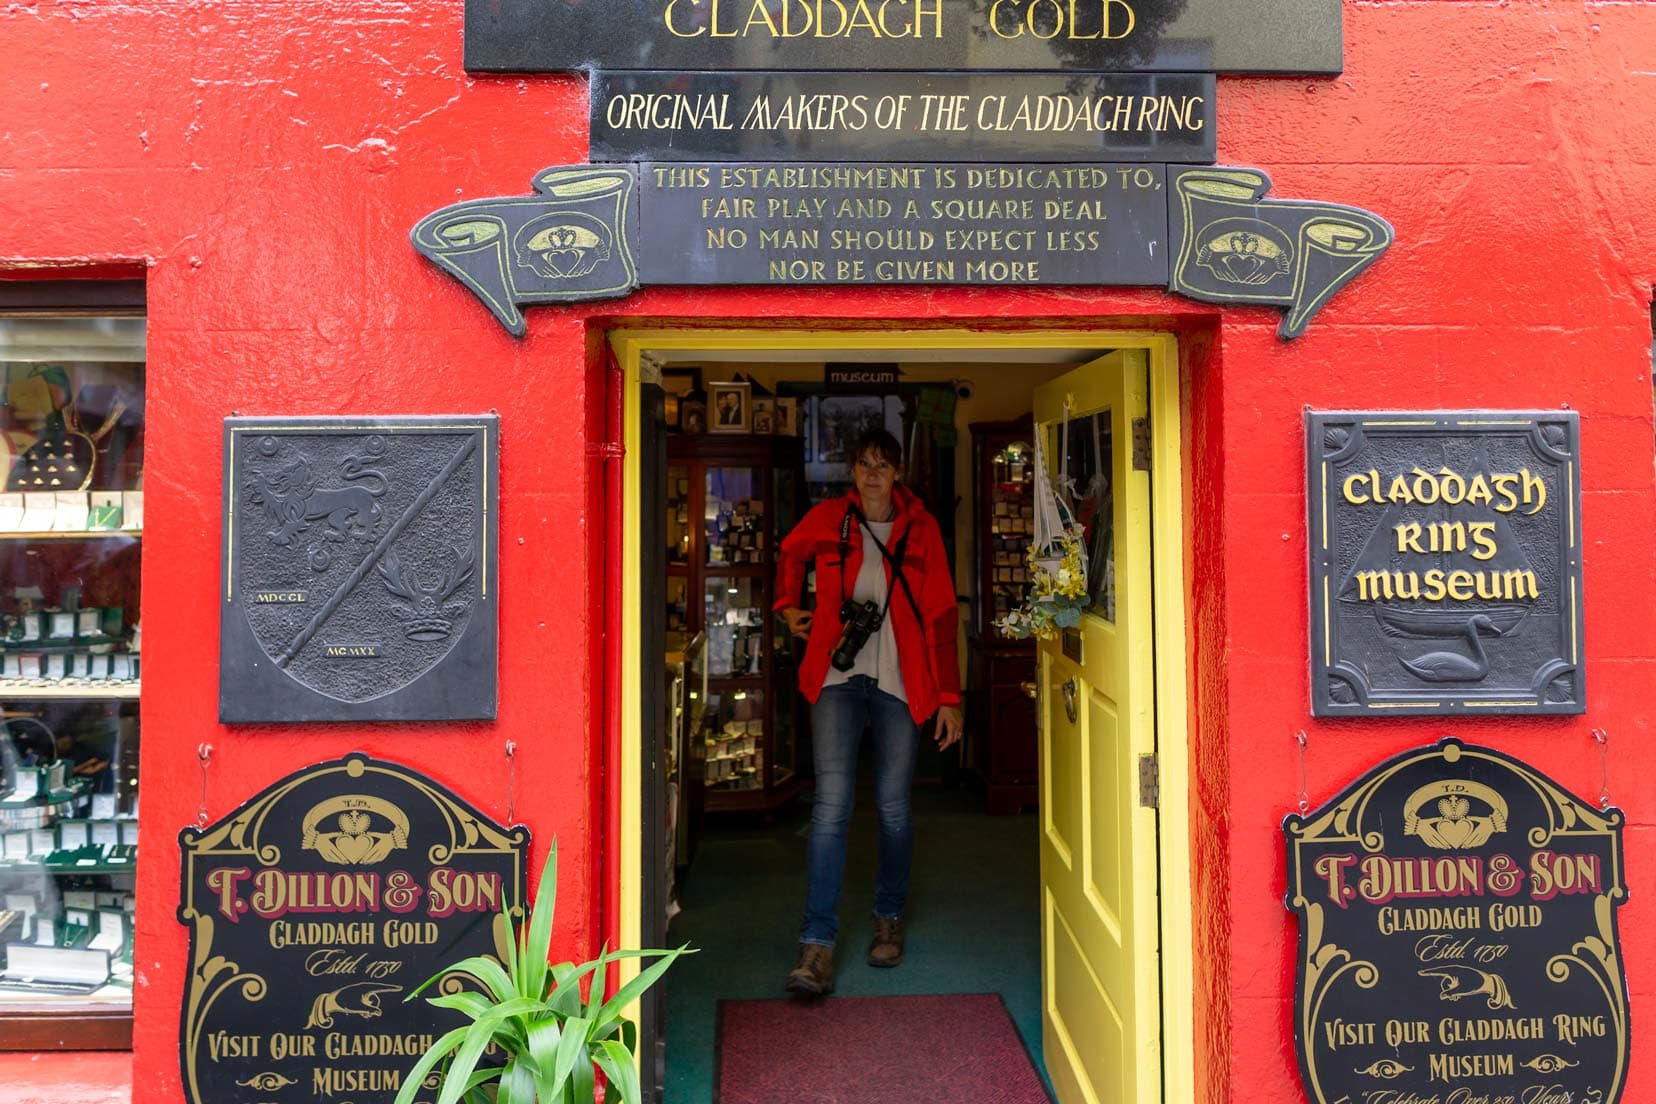 Shelley stood in doorway of red painted building with historical plaques about the claddagh ring